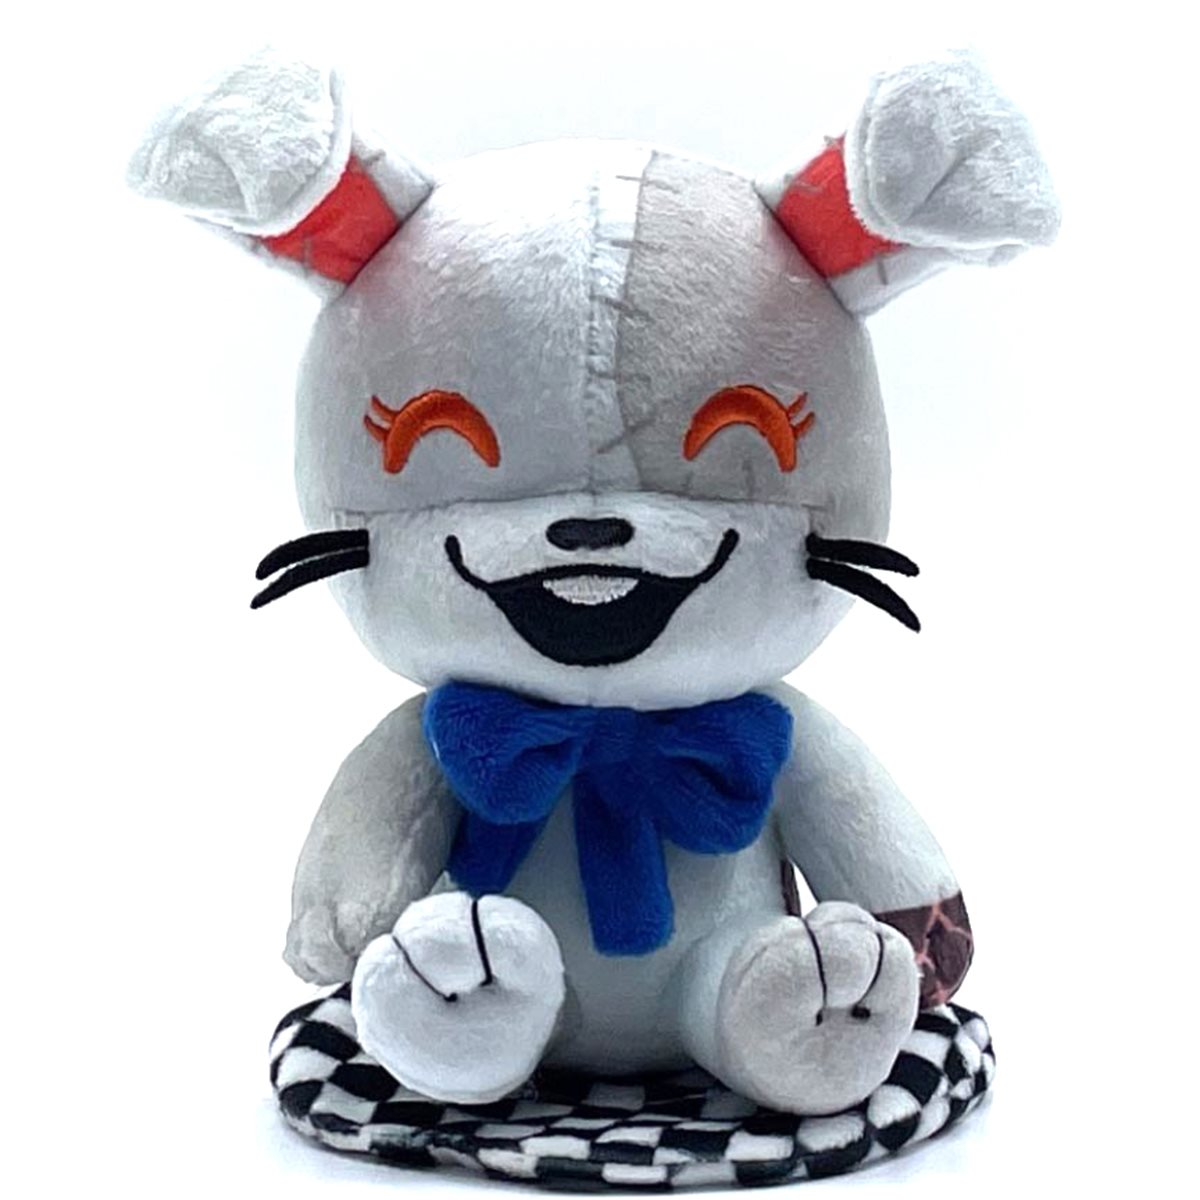 Shop our Mangle Plush (9in) Youtooz Collectibles to find the most